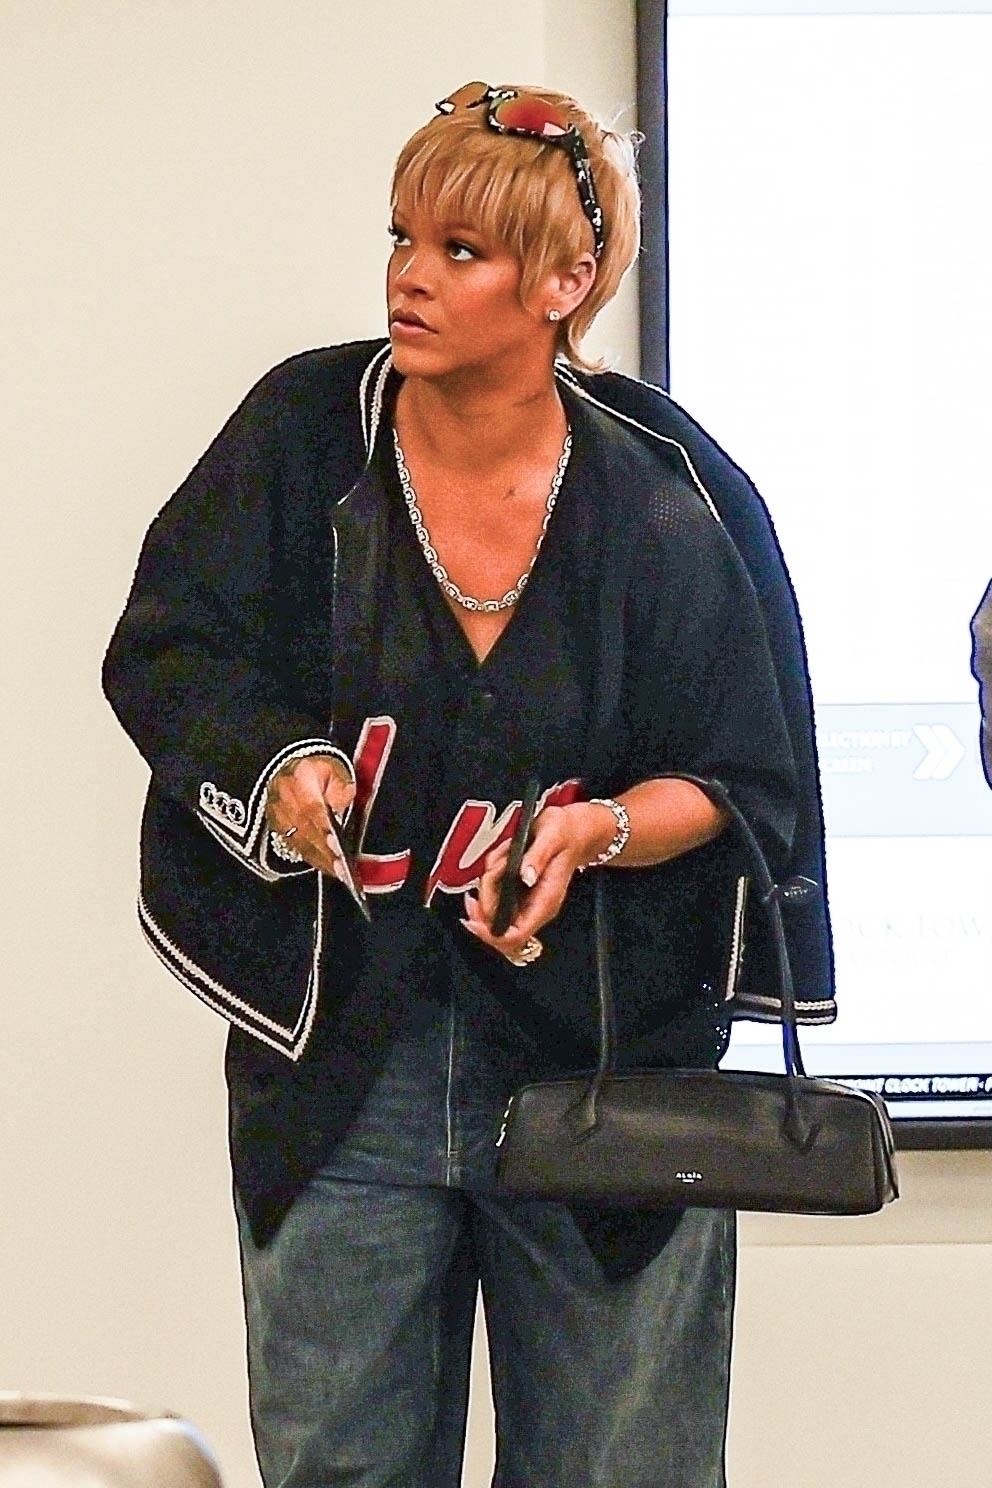 Rihanna's recent look comes as fans have been speculating the singer may be expecting her third child with A$AP Rocky